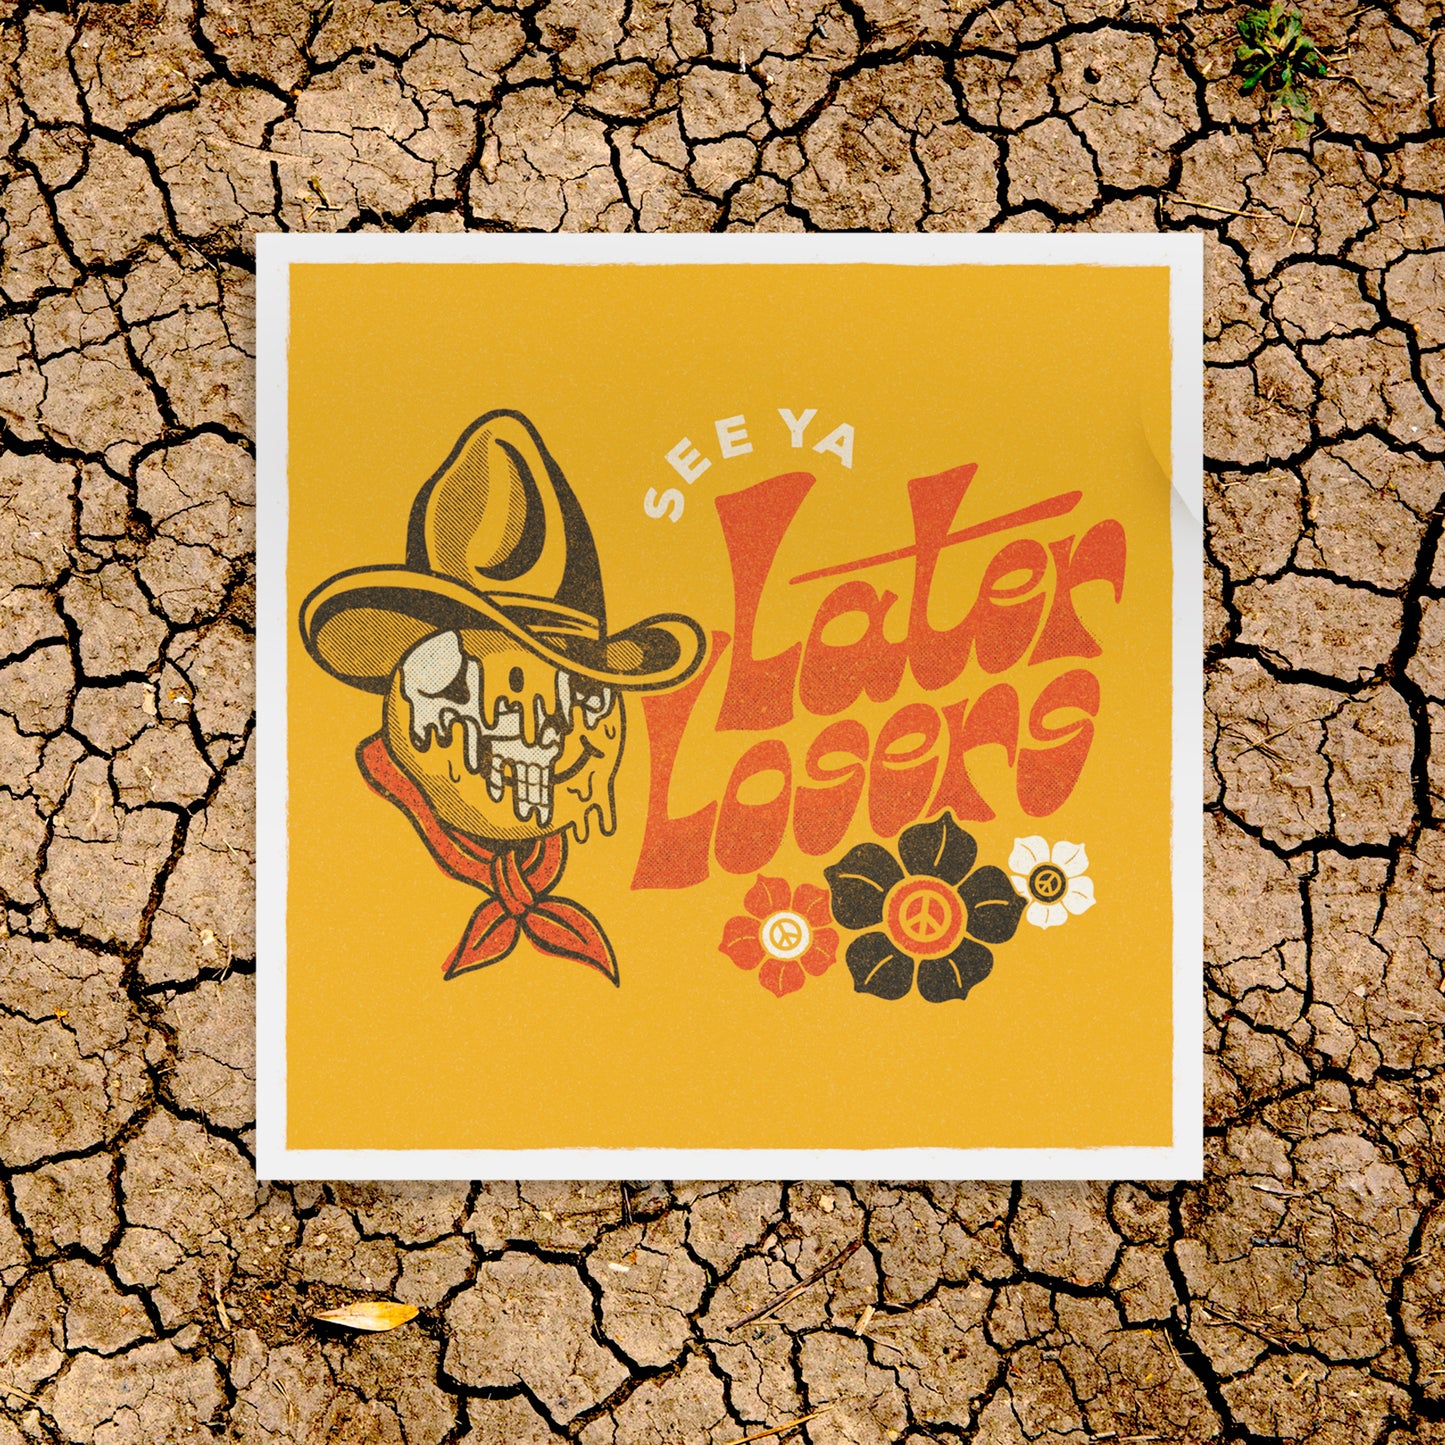 Later Losers - Print